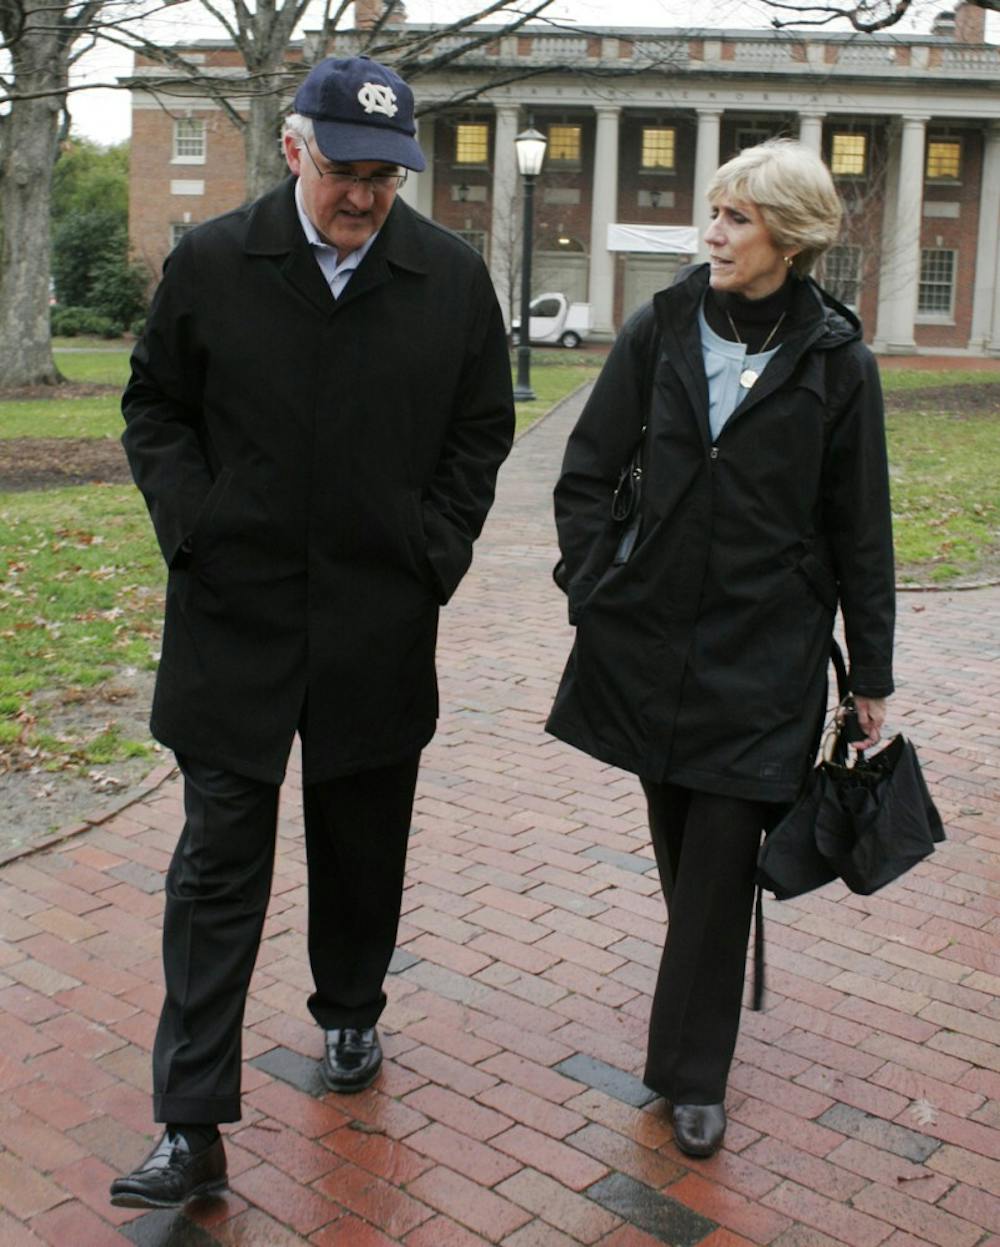 Susan King, the new Dean of the School of Journalism and Mass Communications, goes on a walking tour of the campus with the Associate Dean Speed Hallman. 